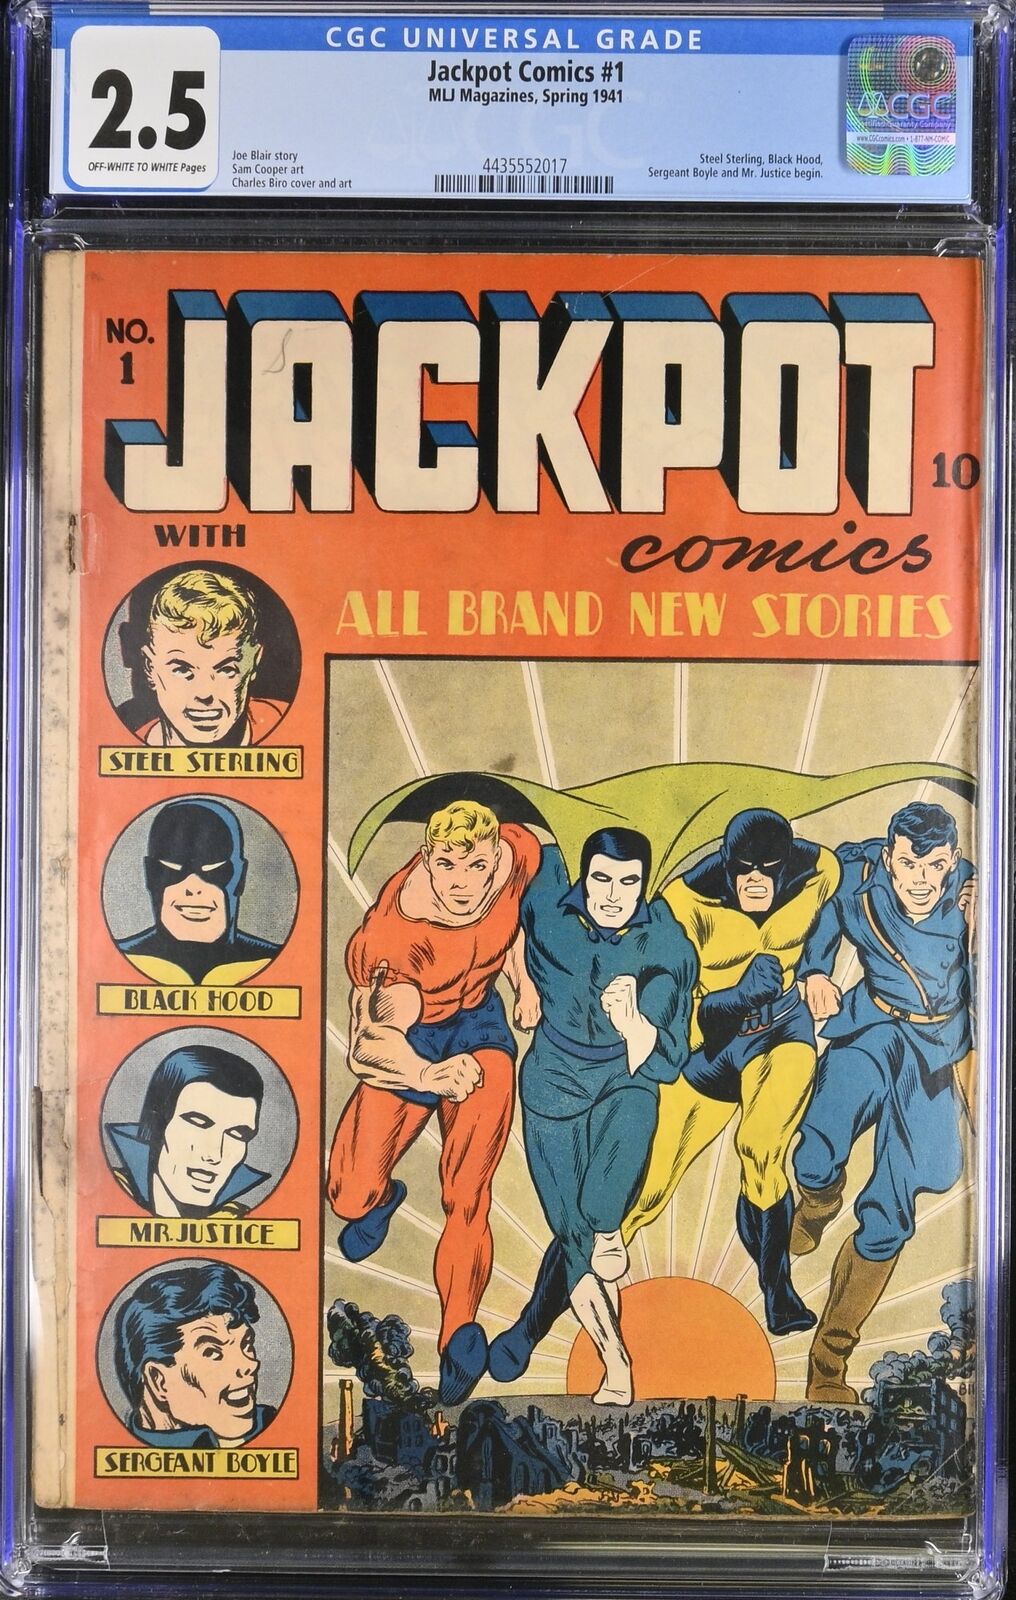 Jackpot Comics (1941) #1 CGC GD+ 2.5 Off White to White Archie 1941